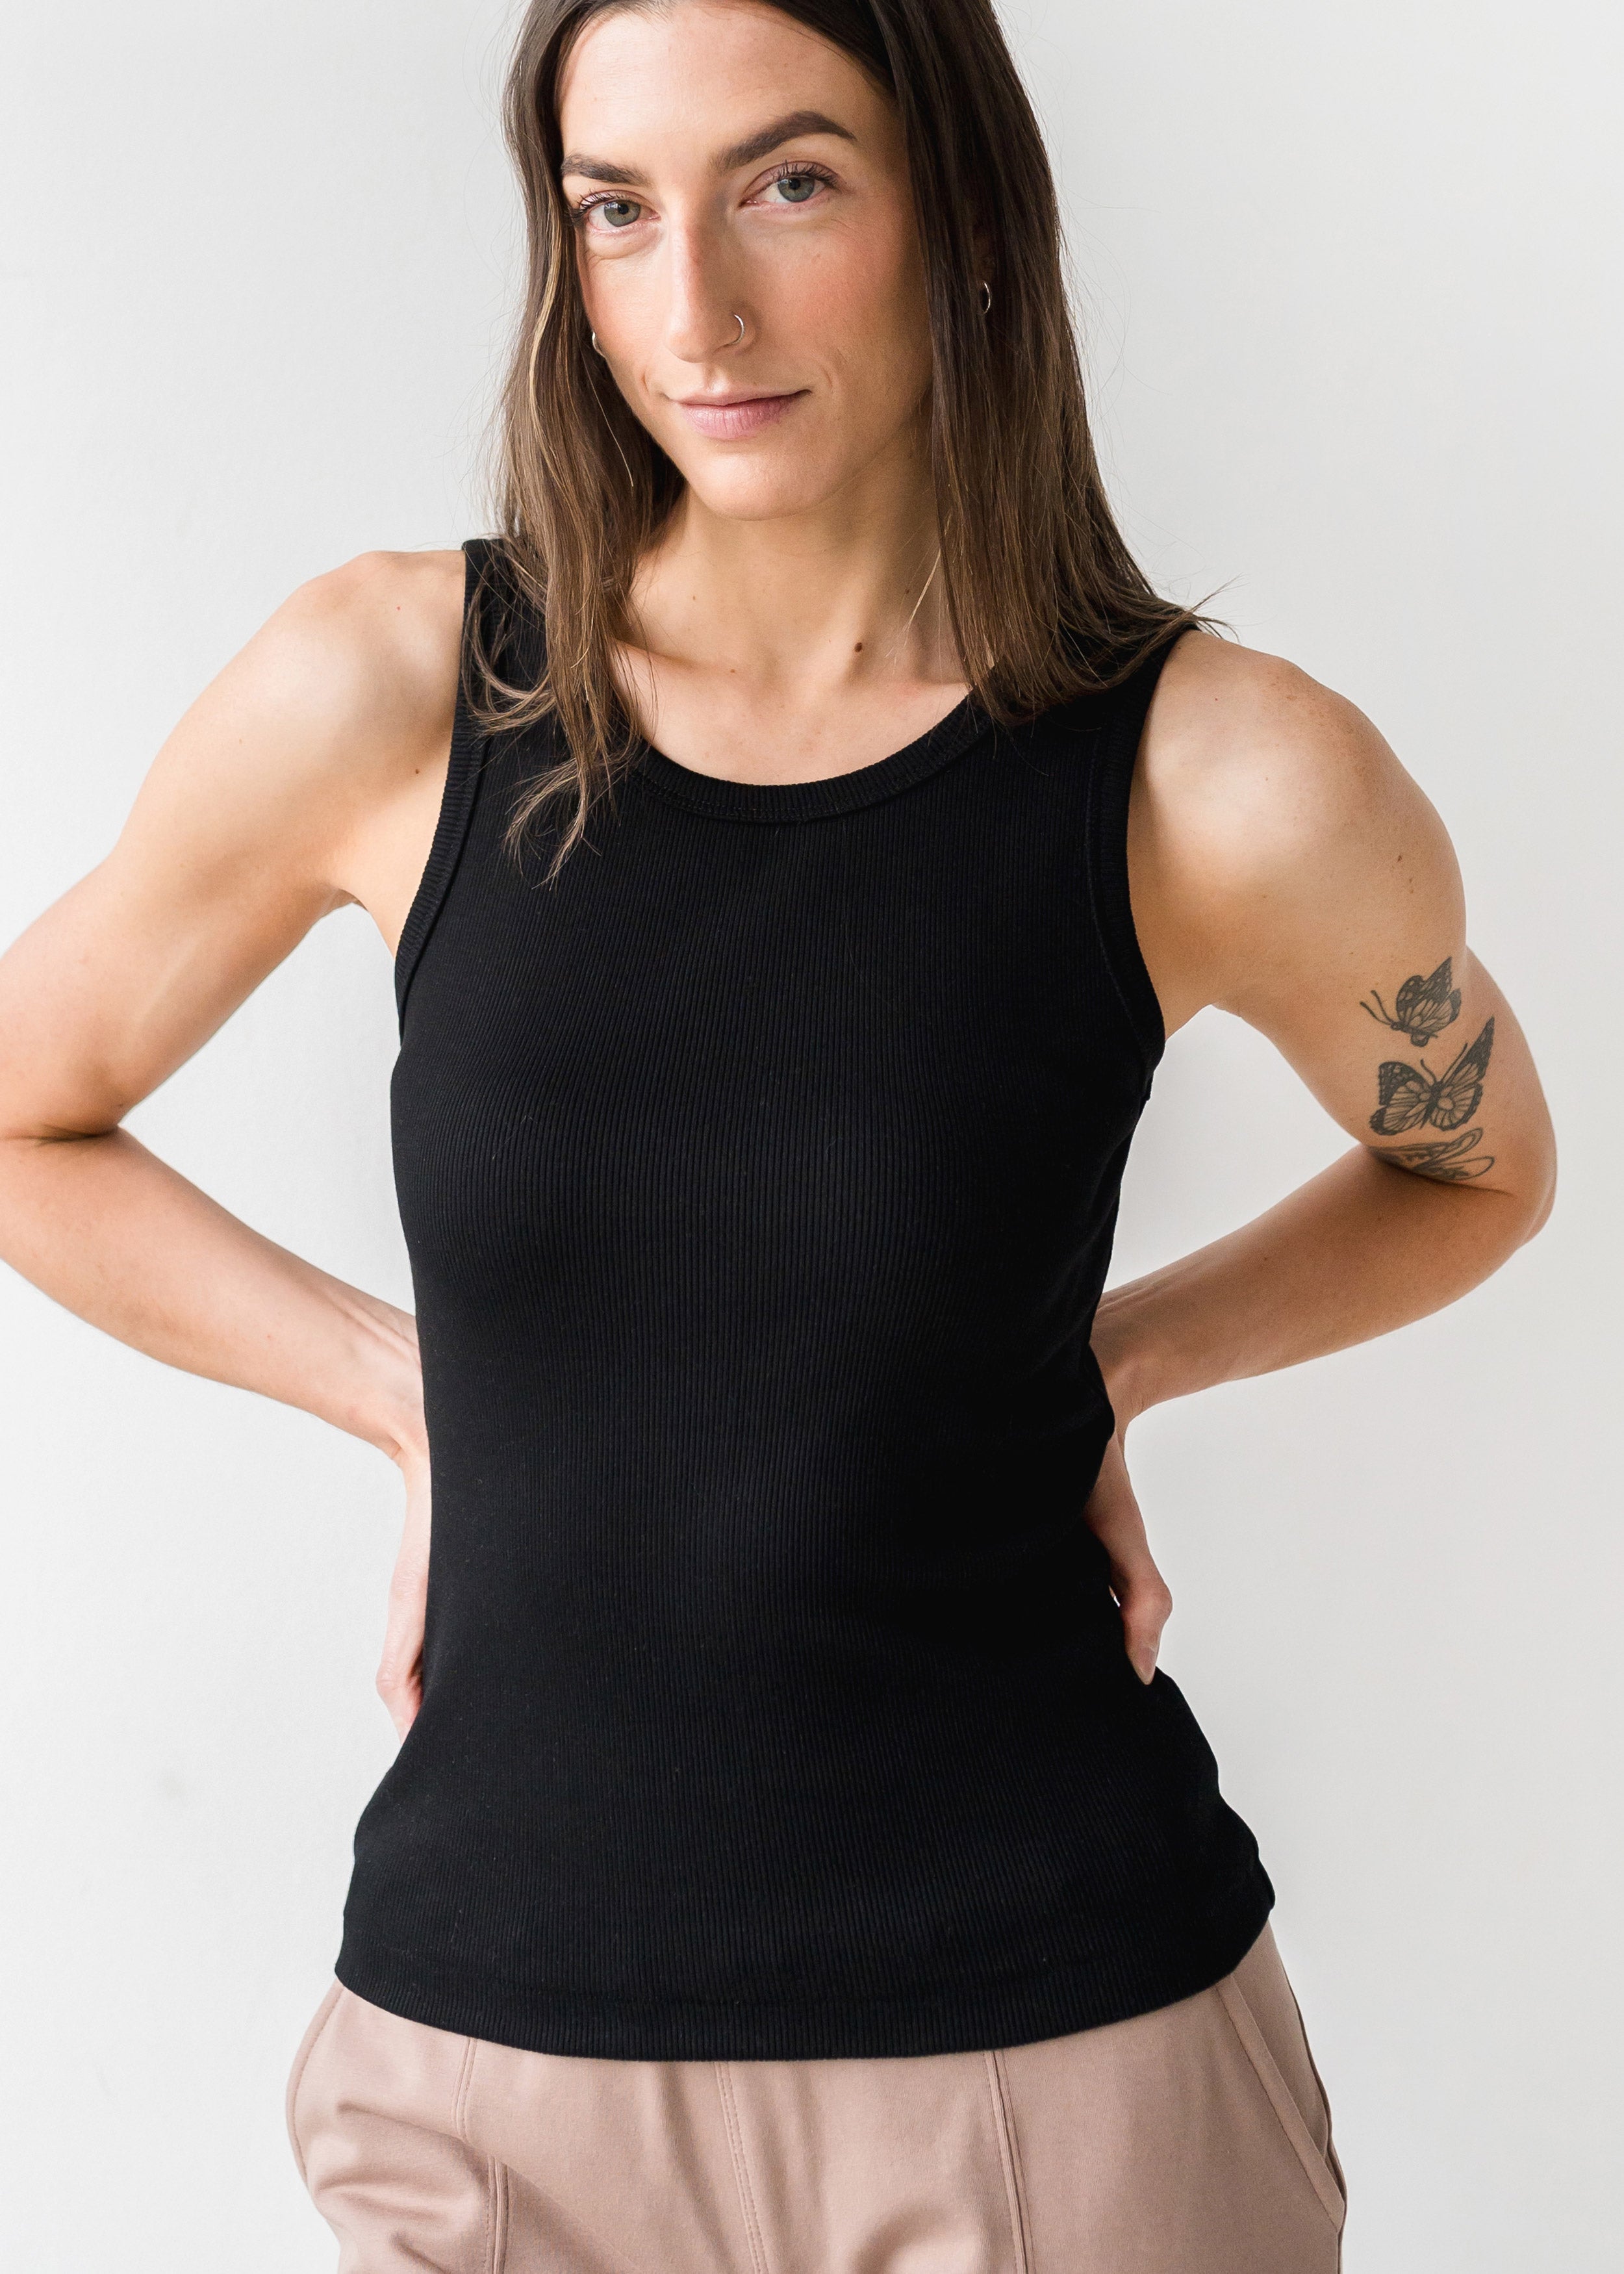 The Tuckable Rib Tank in Black | FRANC Sustainable Clothing